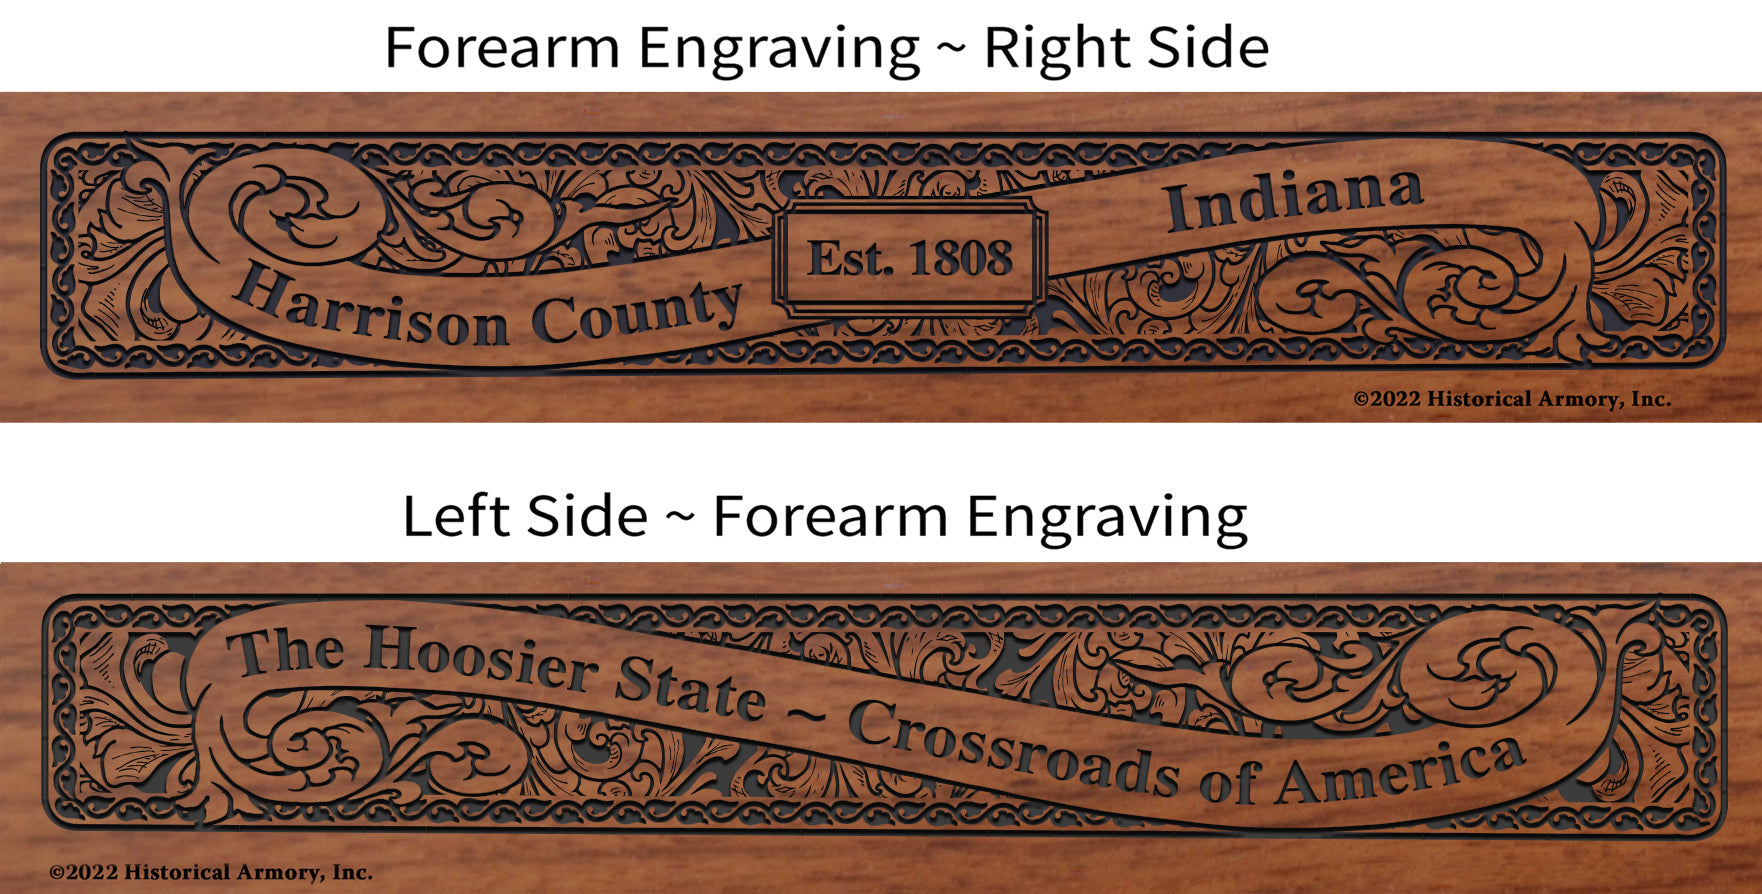 Harrison County Indiana Engraved Rifle Forearm